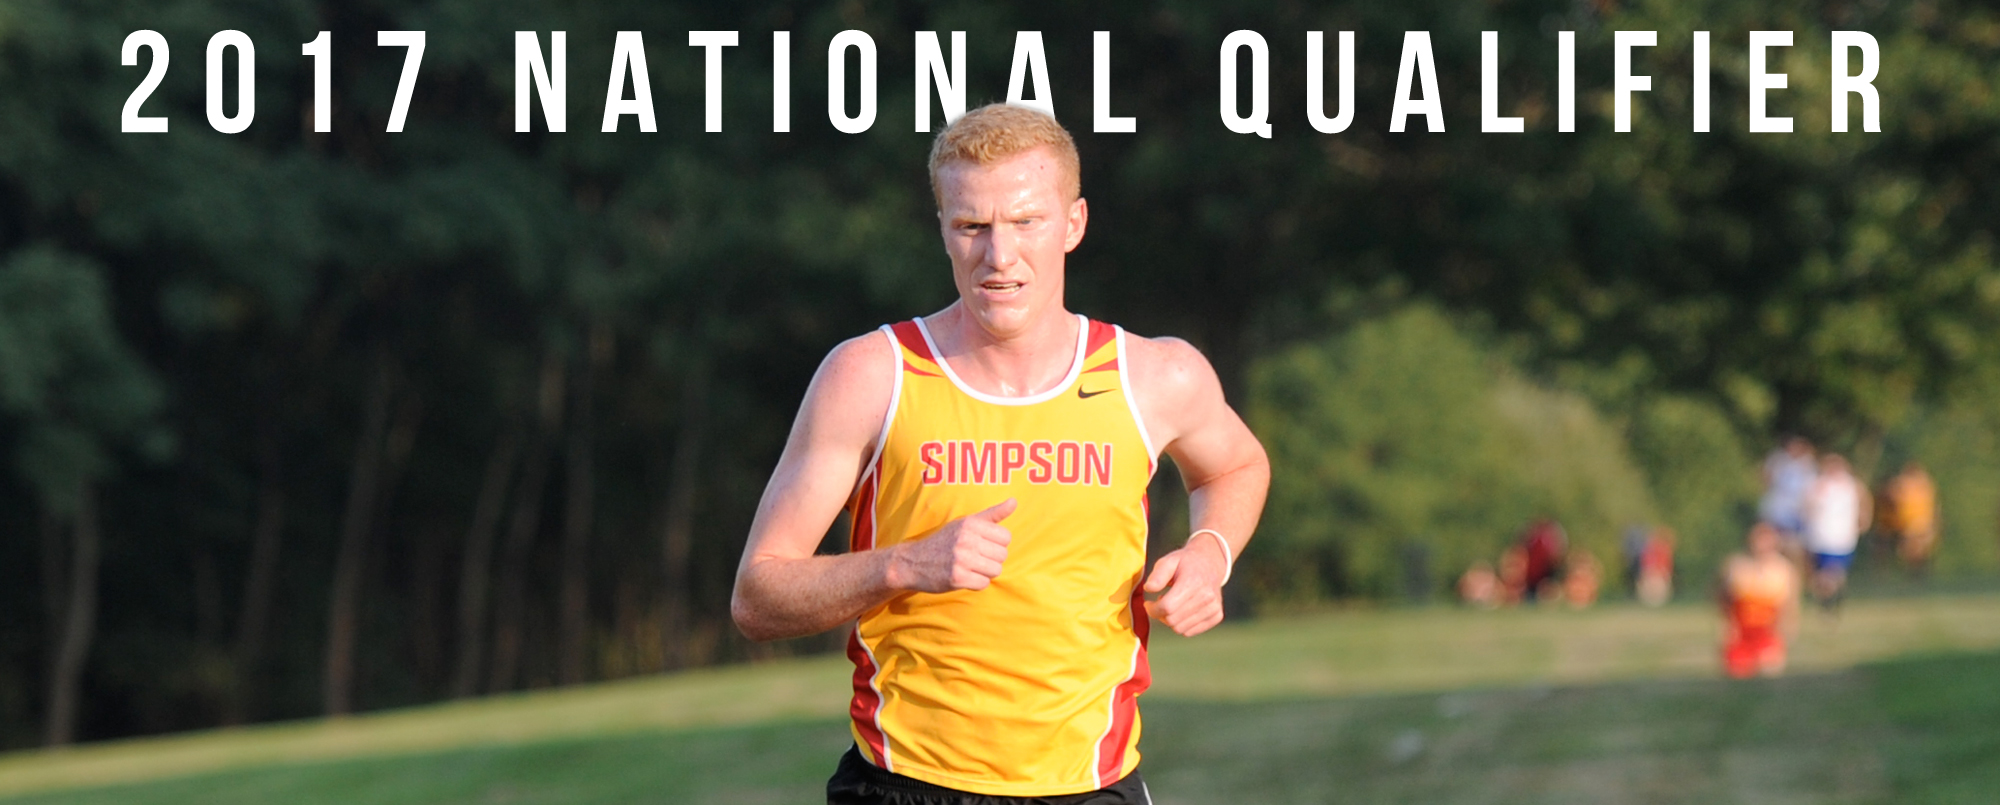 Ian McKenzie is Simpson's 13th cross country national qualifier in school history.